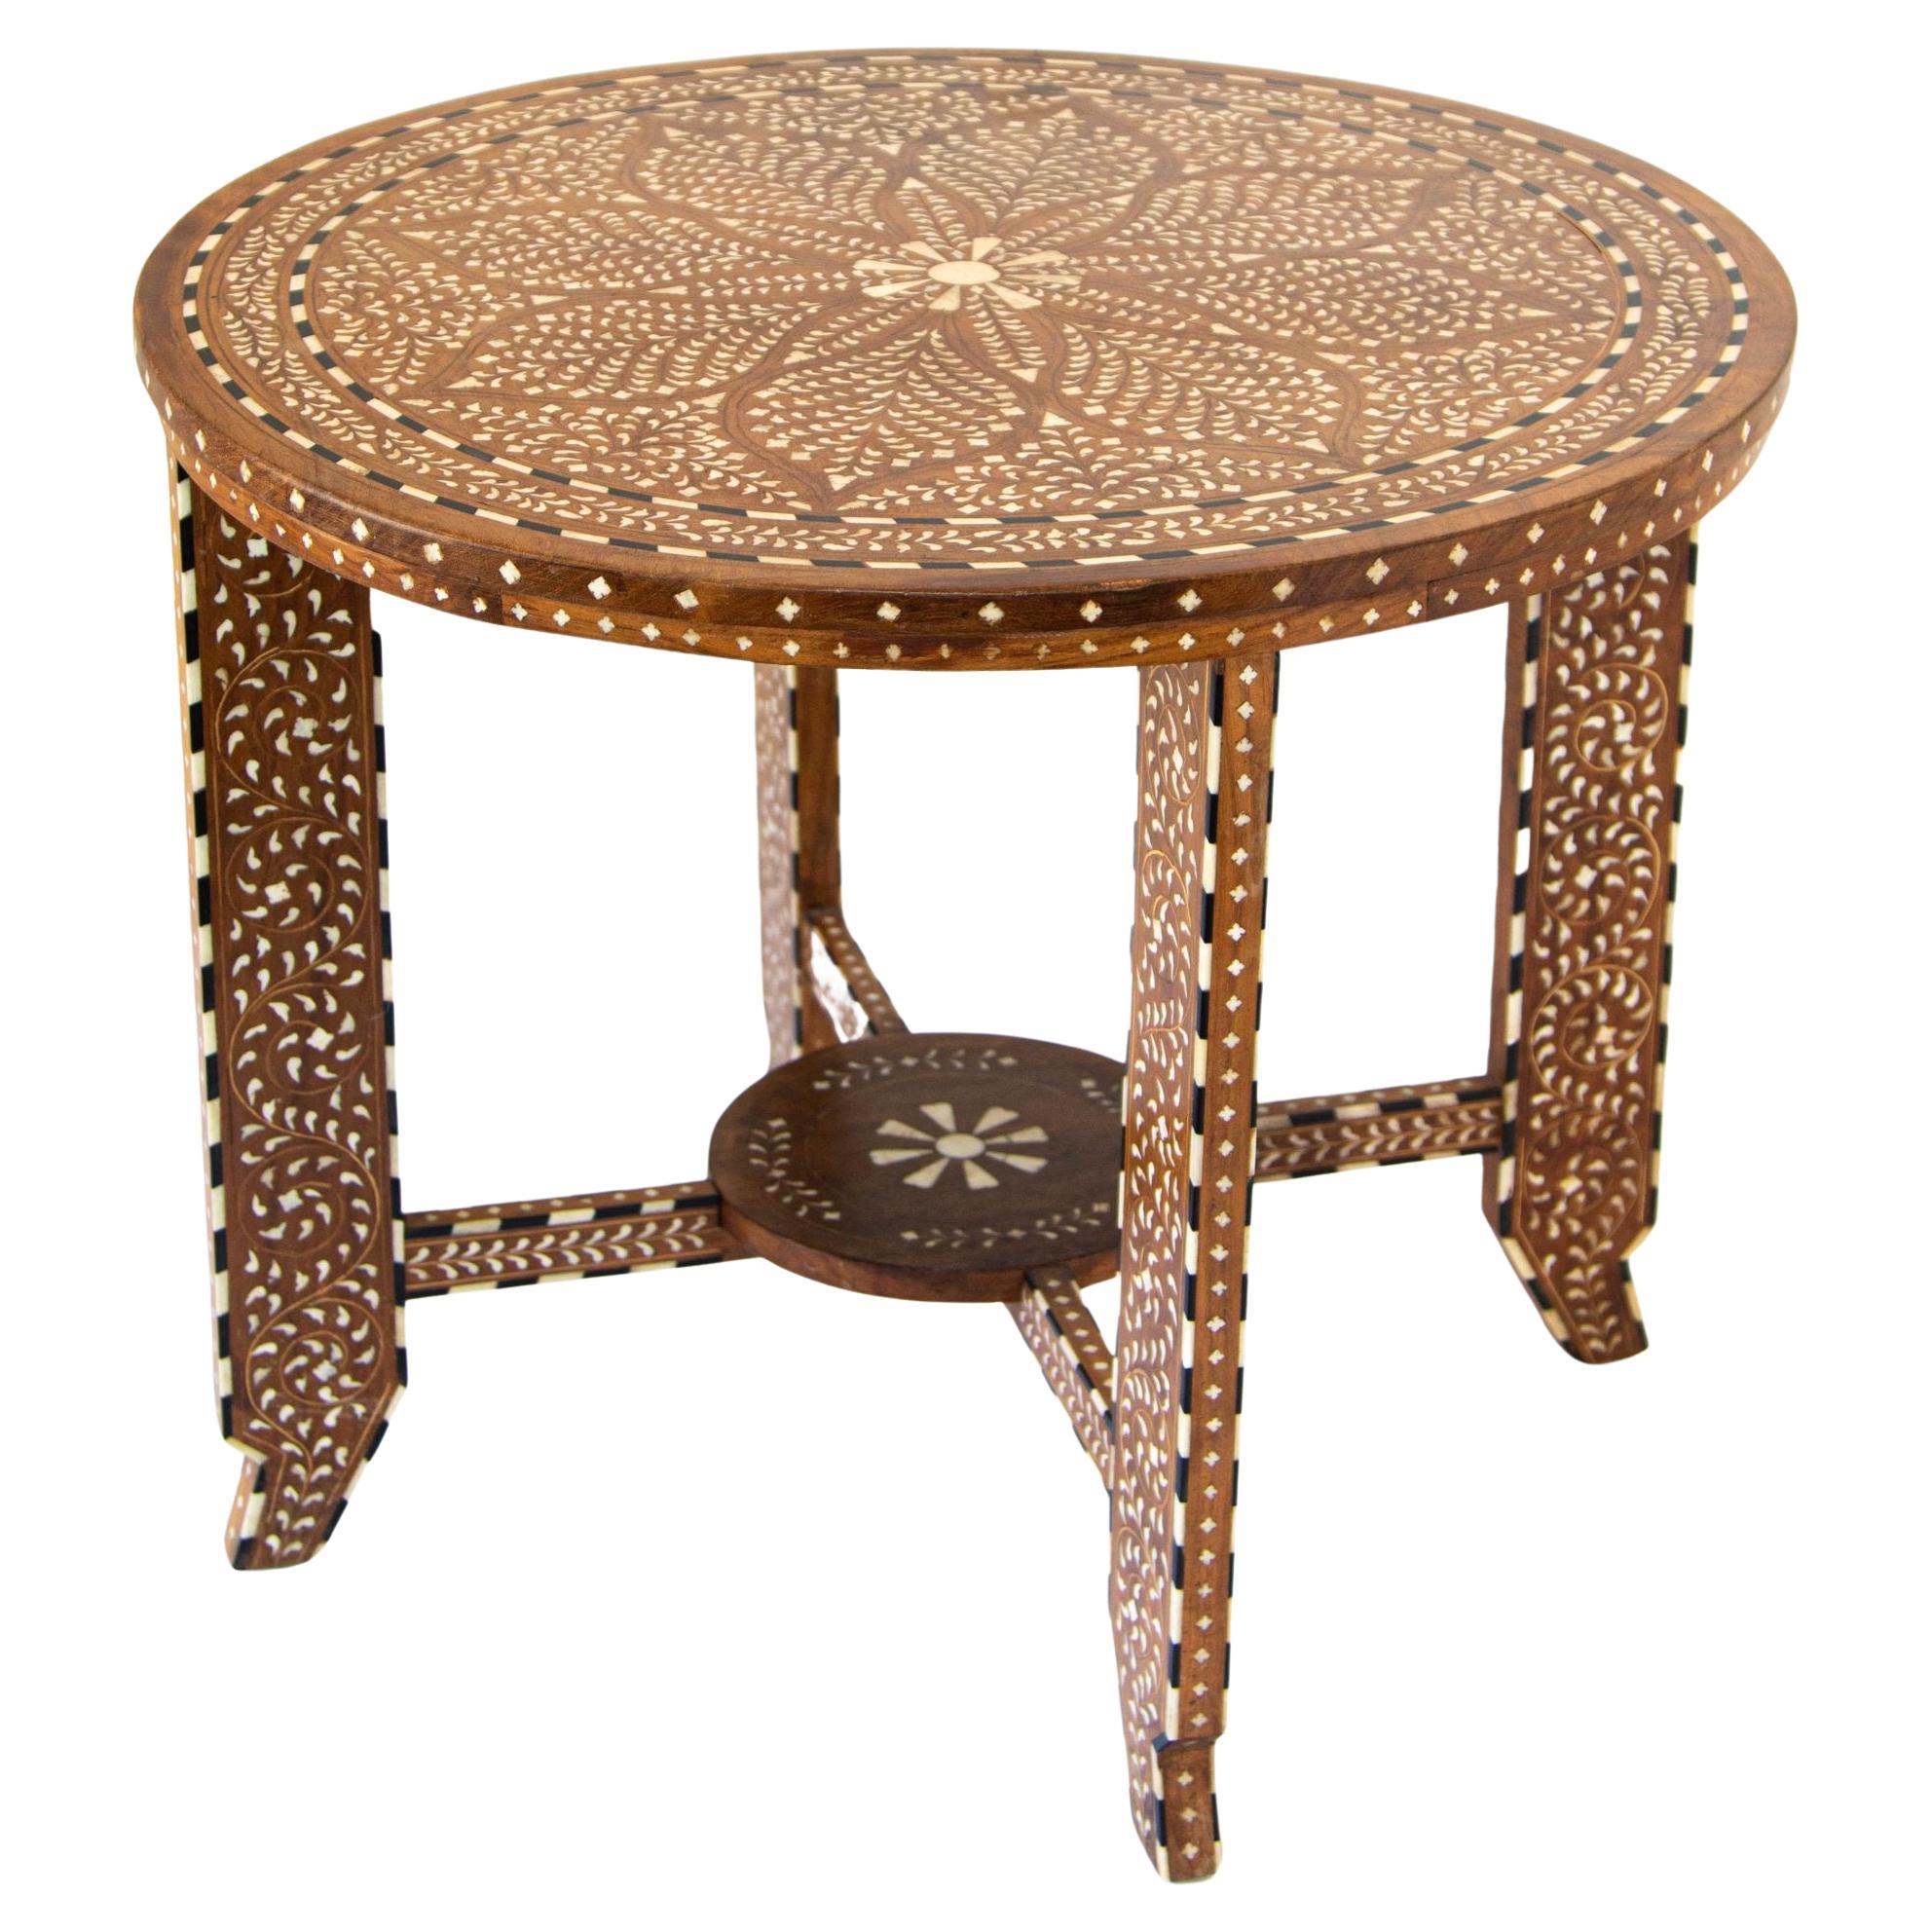 Anglo Indian Mughal Teak Wood Round Side Table with Bone Inlaid For Sale